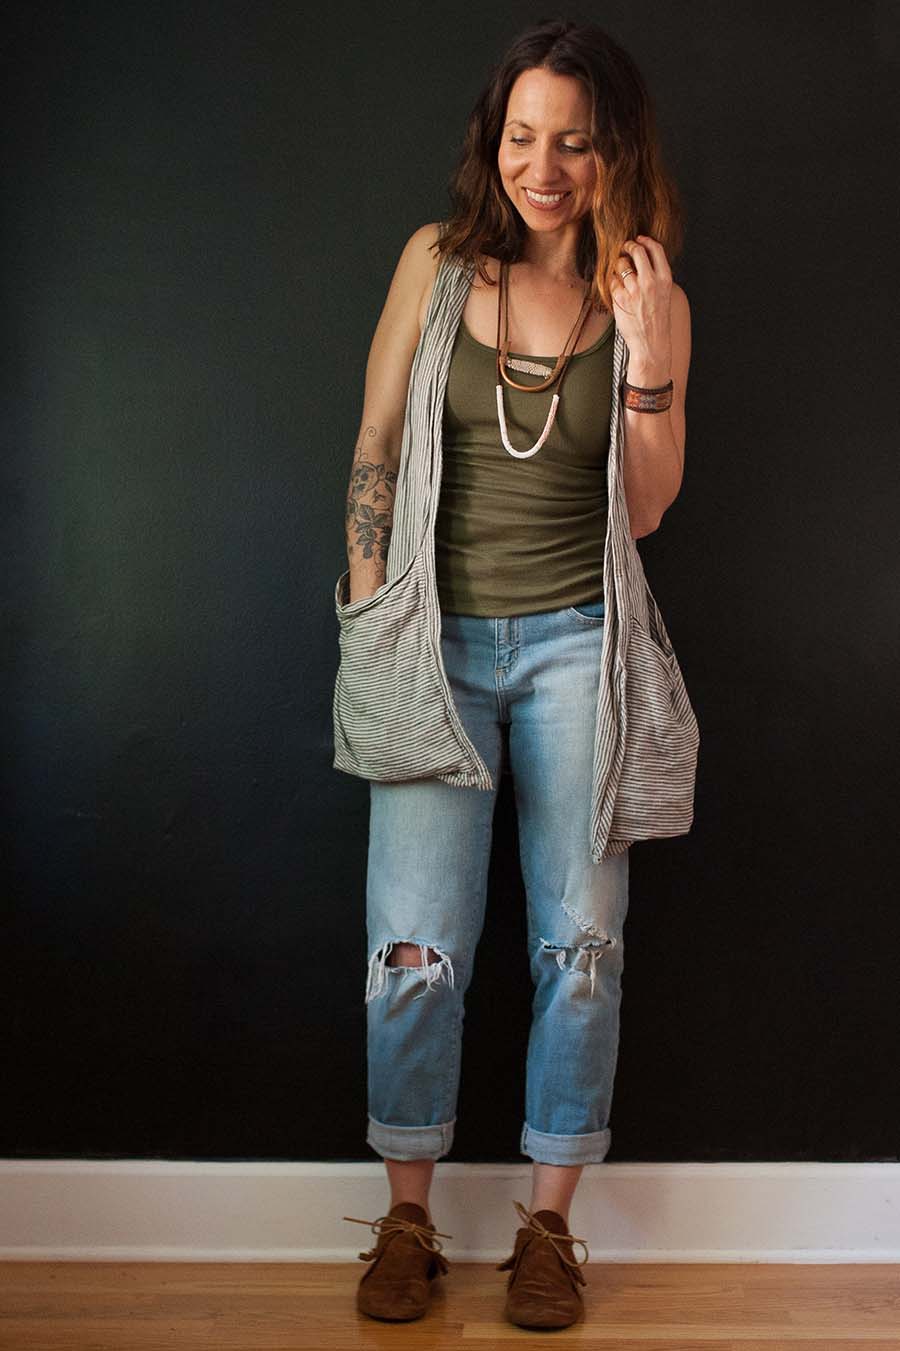 Meg wears a Forager Vest over a tank top and jeans